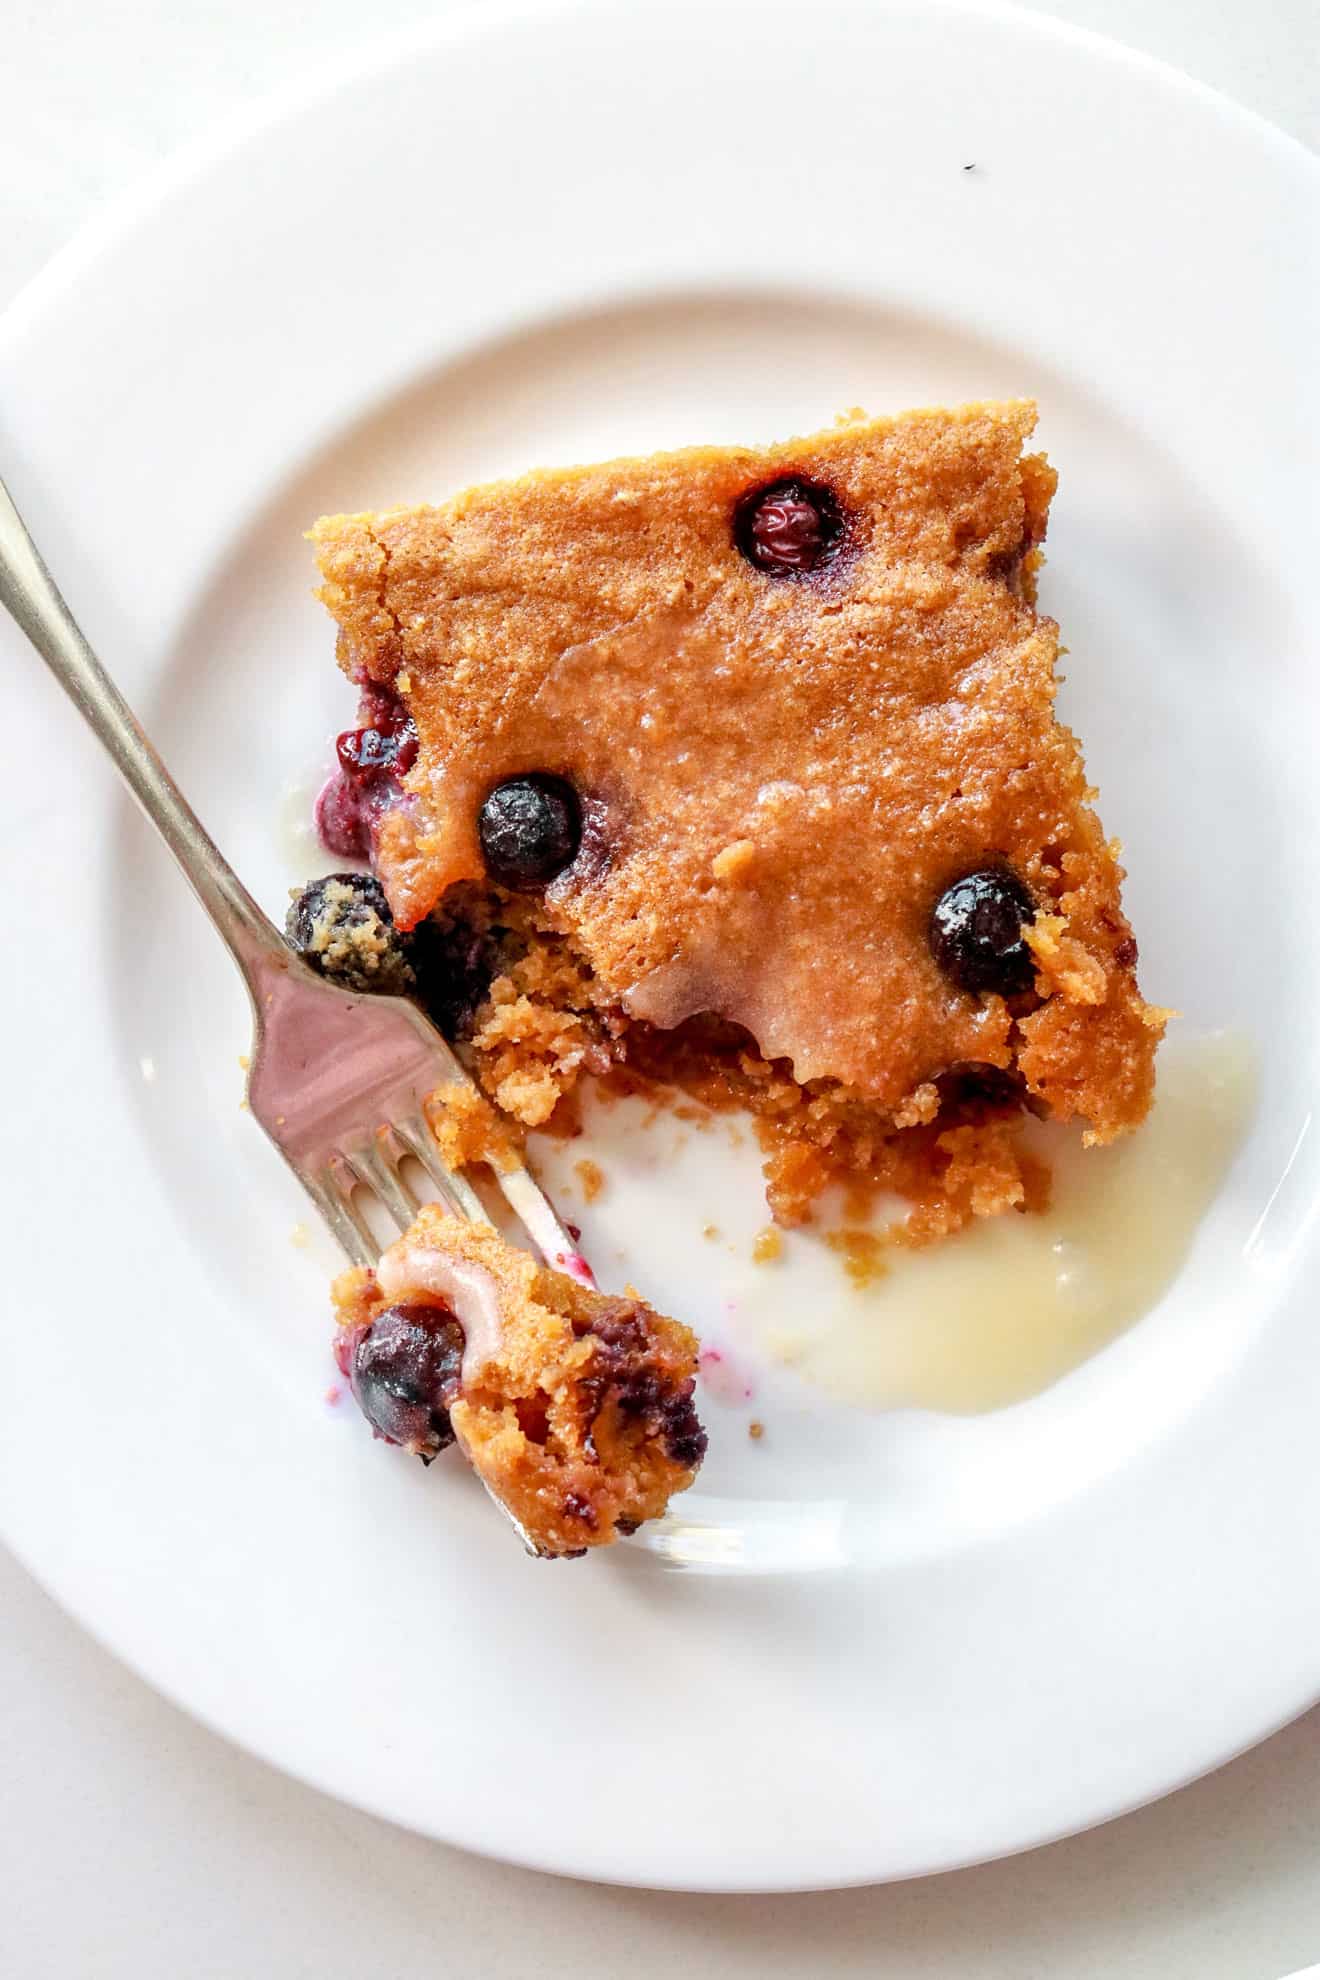 This is an overhead vertical image of a square  cake with blueberries on top sitting on a white plate. The square cake is topped with a white glaze. A fork is coming in from the top corner and angled to lean on the center of the plate with a bite taken out of it. 